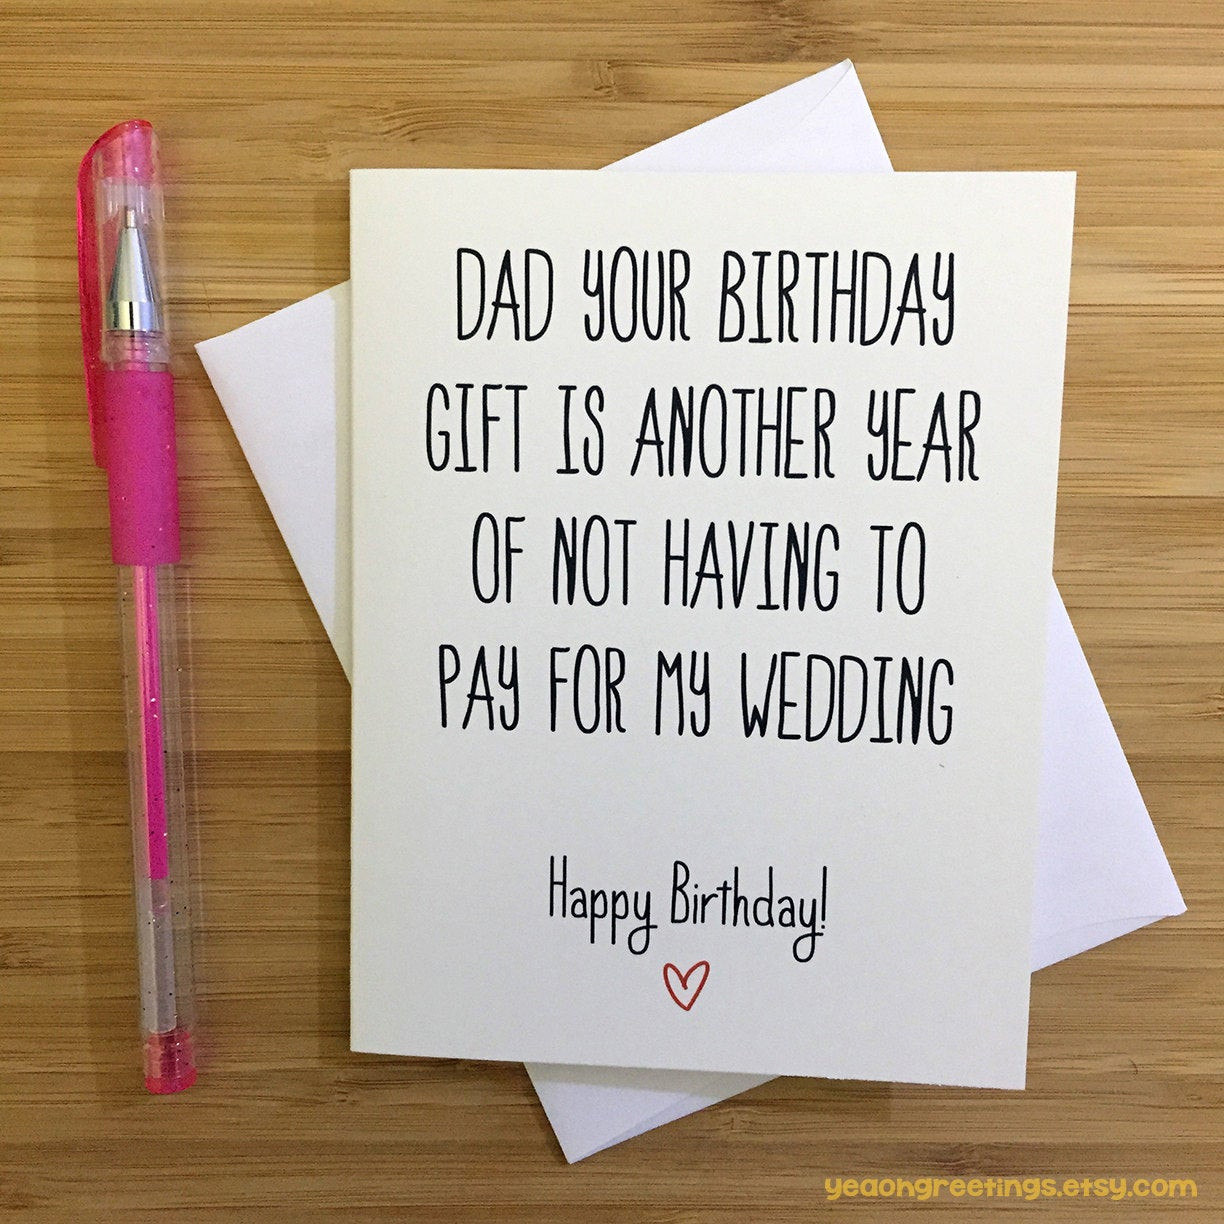 Happy Birthday Cards For Dad
 Happy Birthday Dad Card for Dad Funny Dad Card Gift for